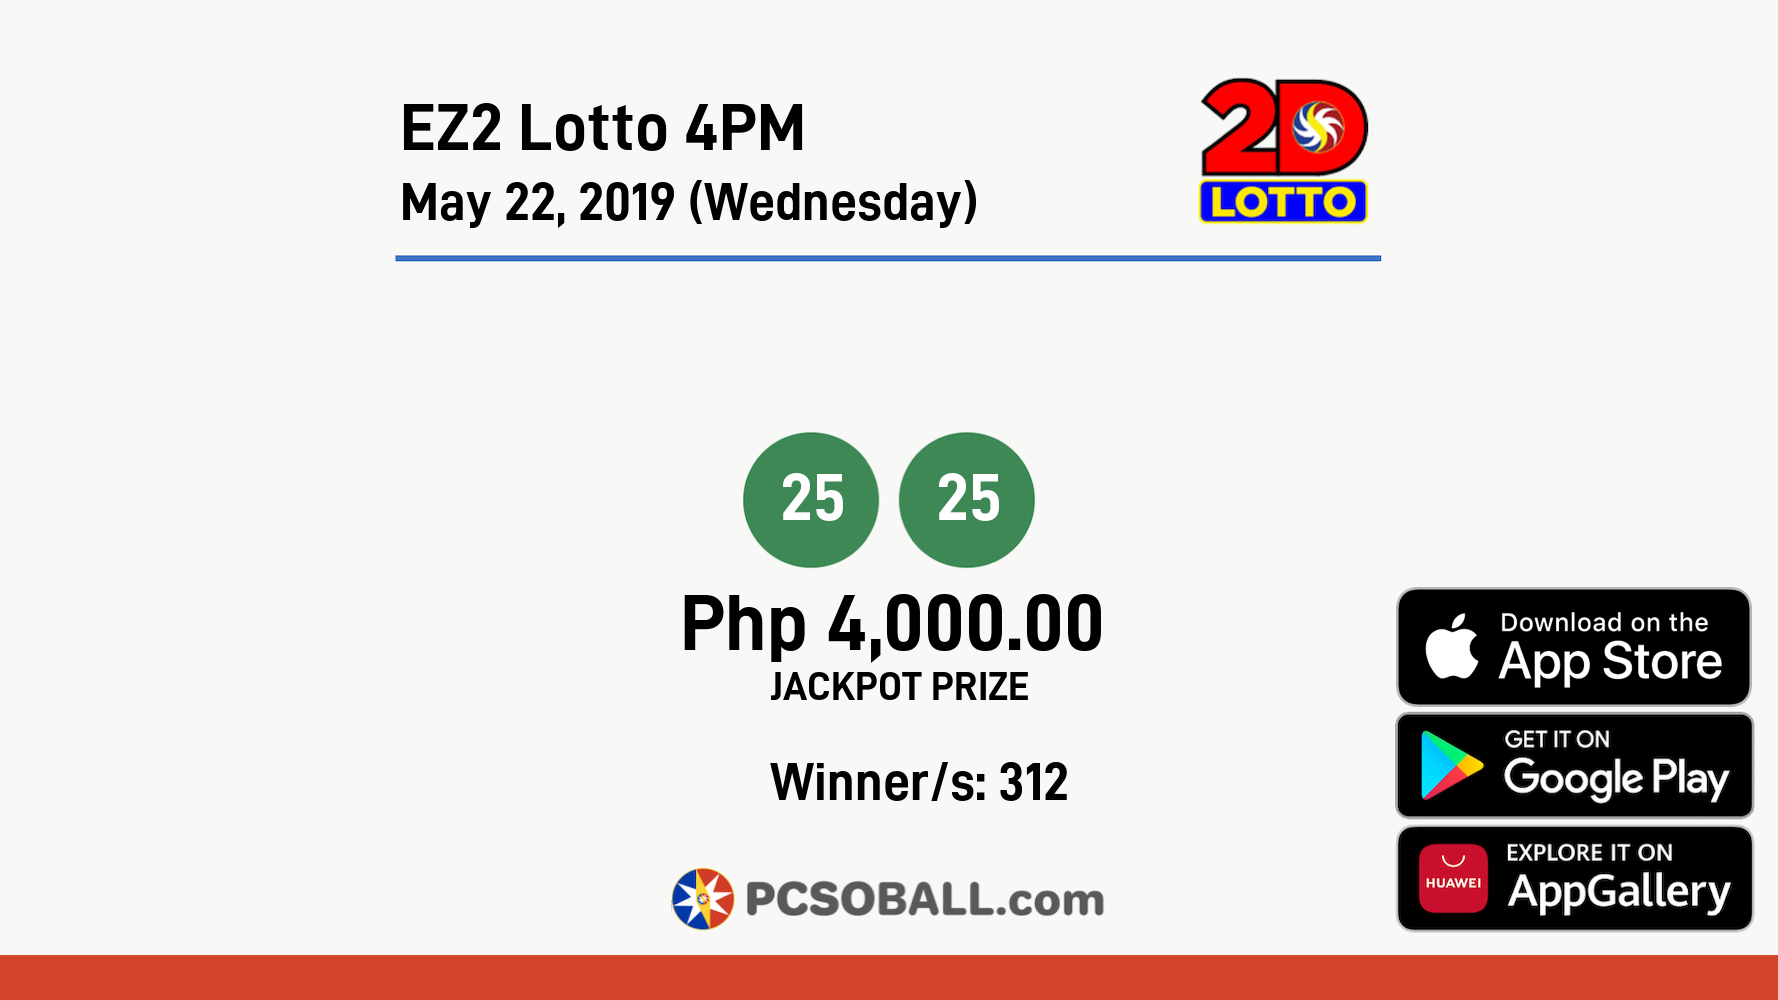 EZ2 Lotto 4PM May 22, 2019 (Wednesday) Result